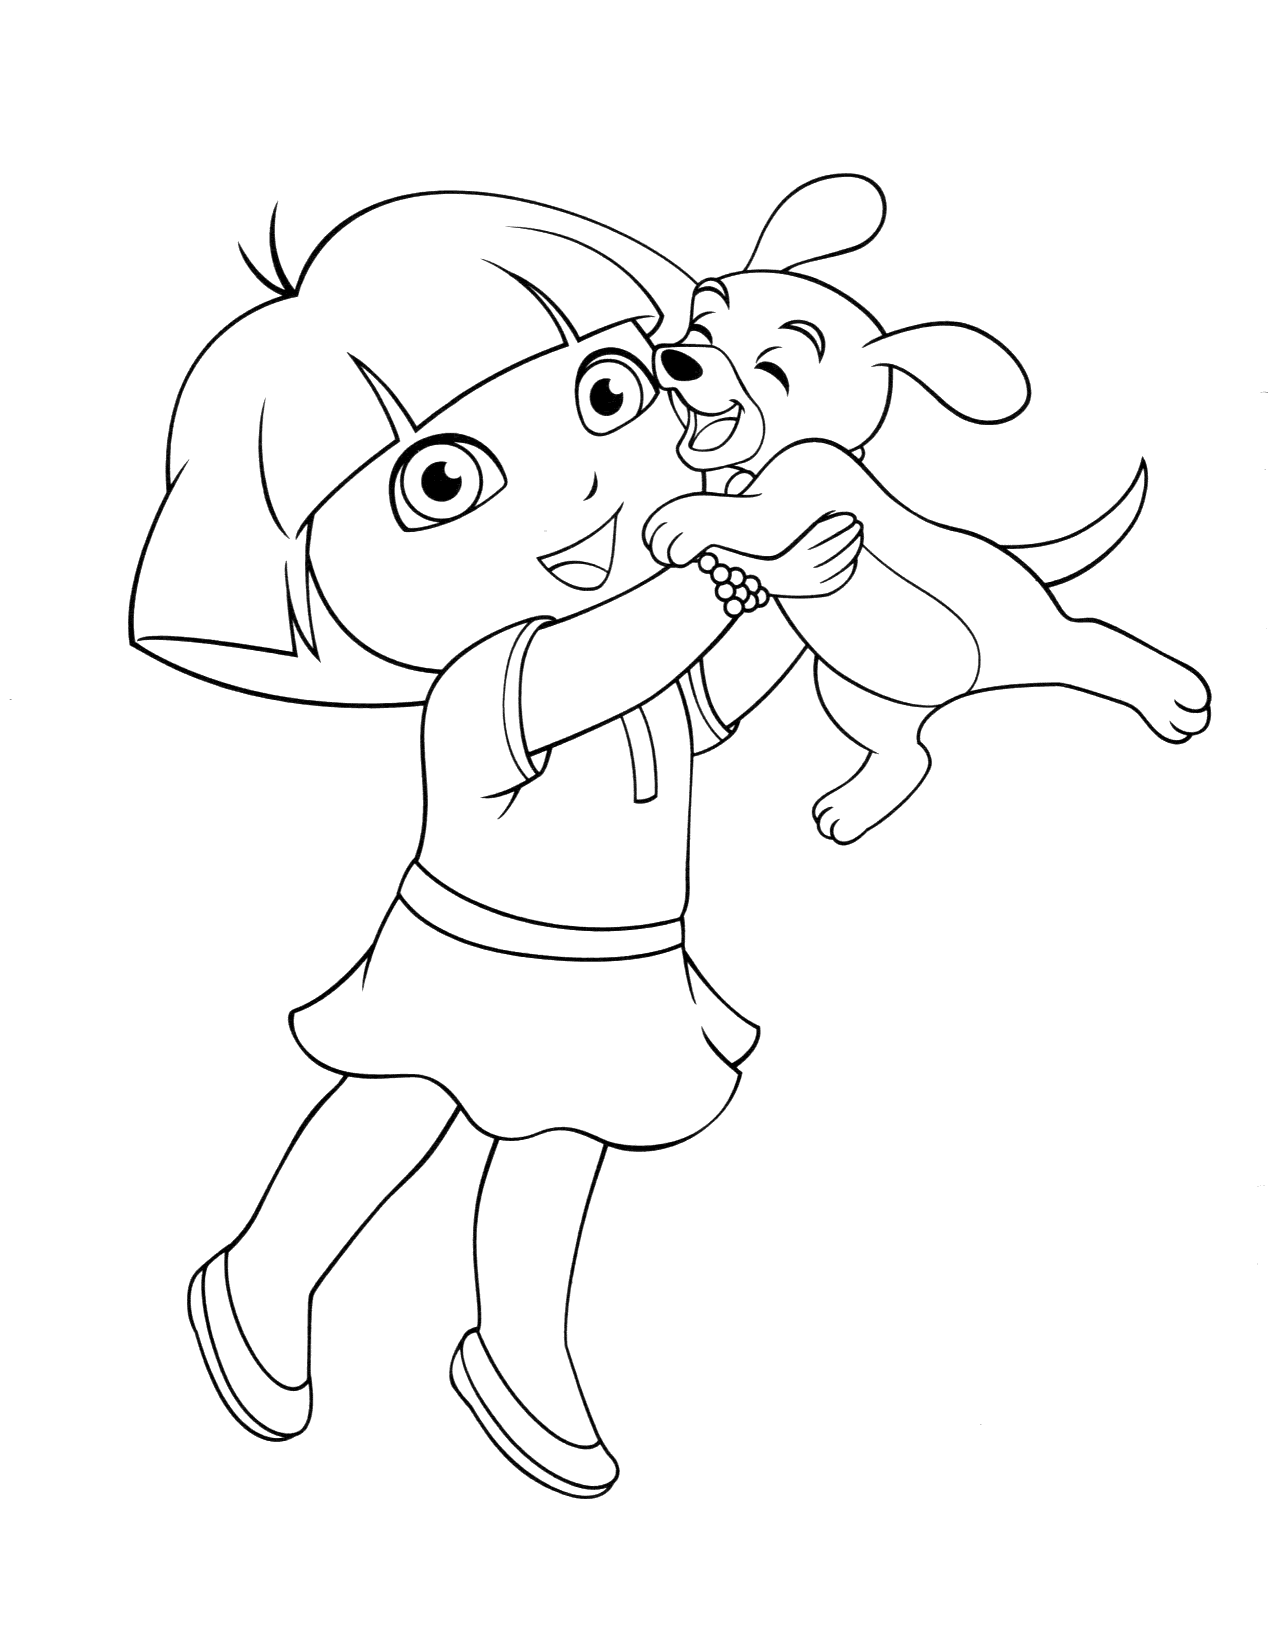 Dora with dog jumping This coloring page